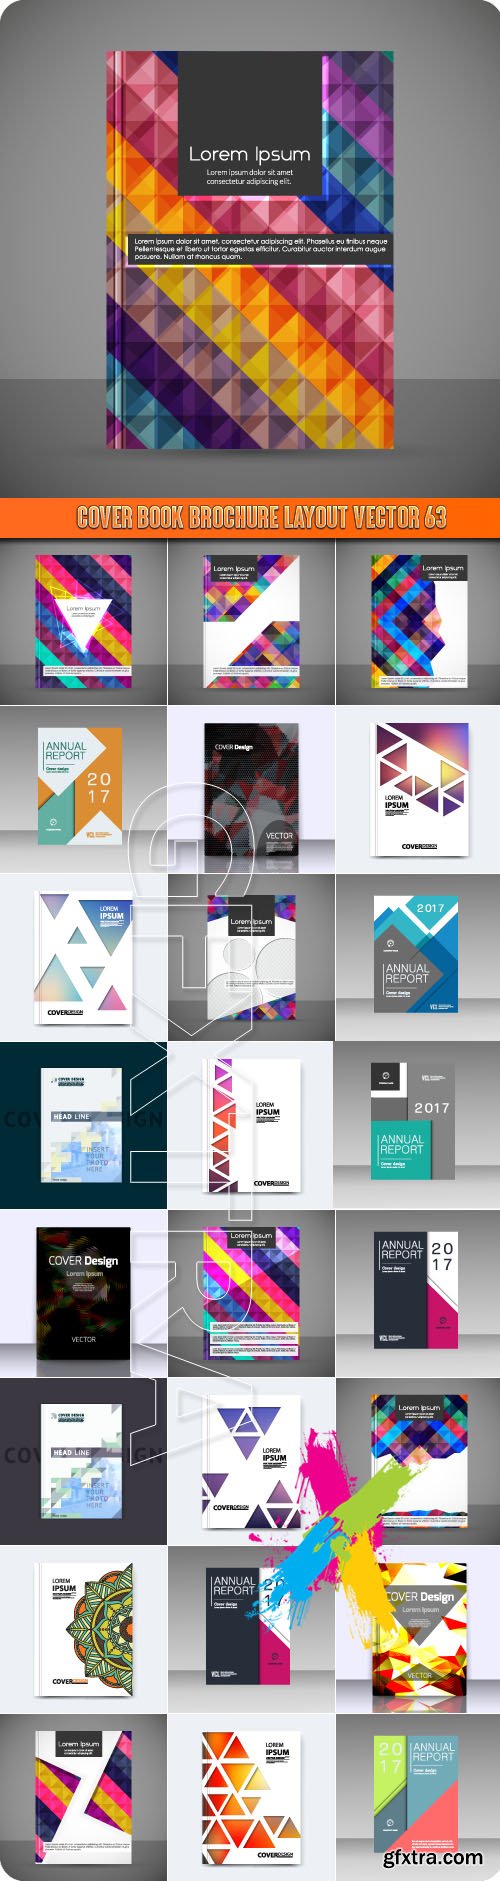 Cover book brochure layout vector 63